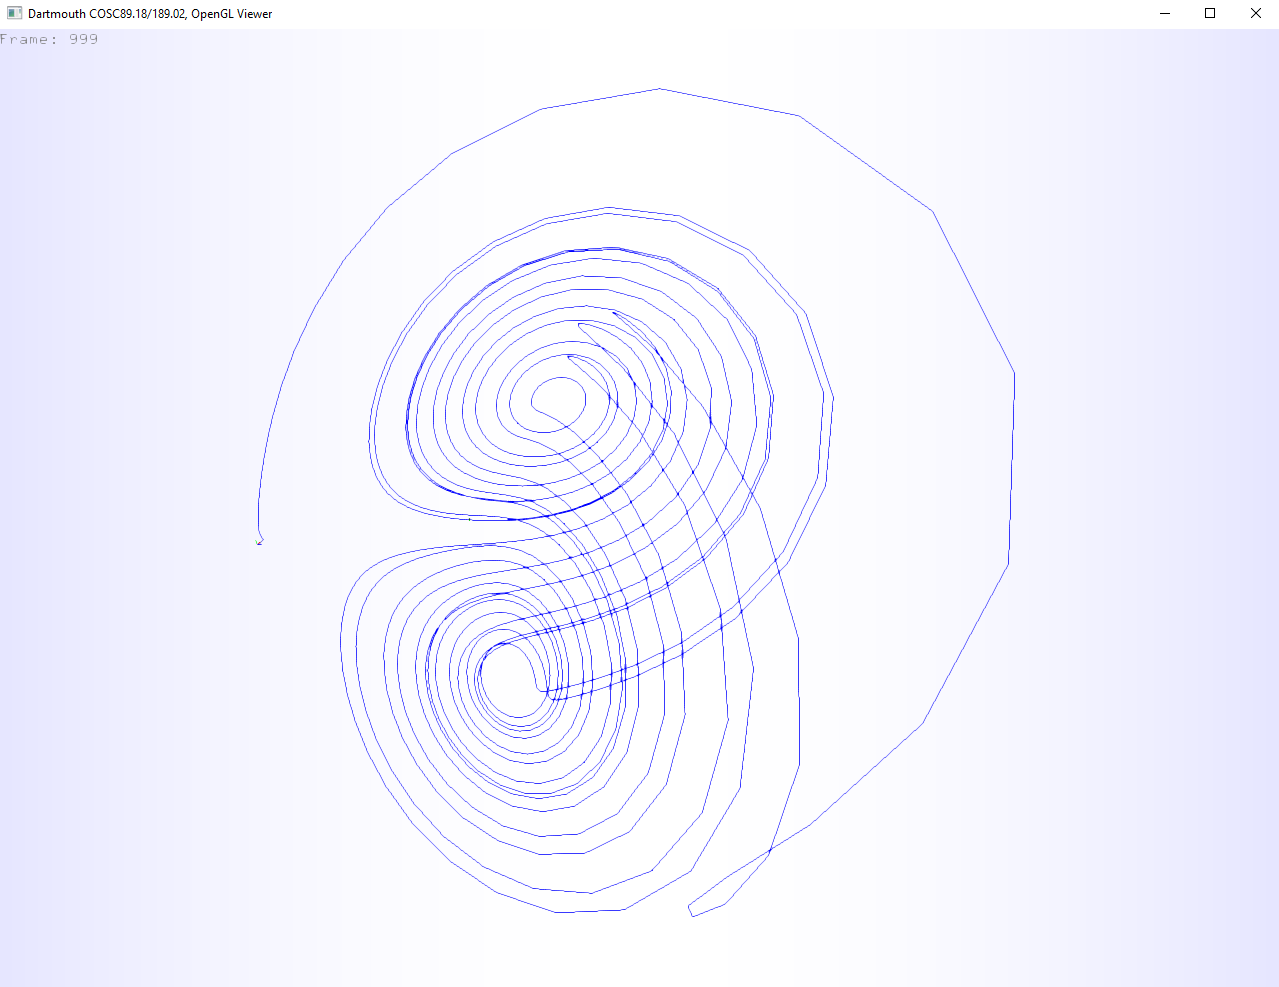 Visulization of the Lorenz particle trajectory in the OpenGL Viewer